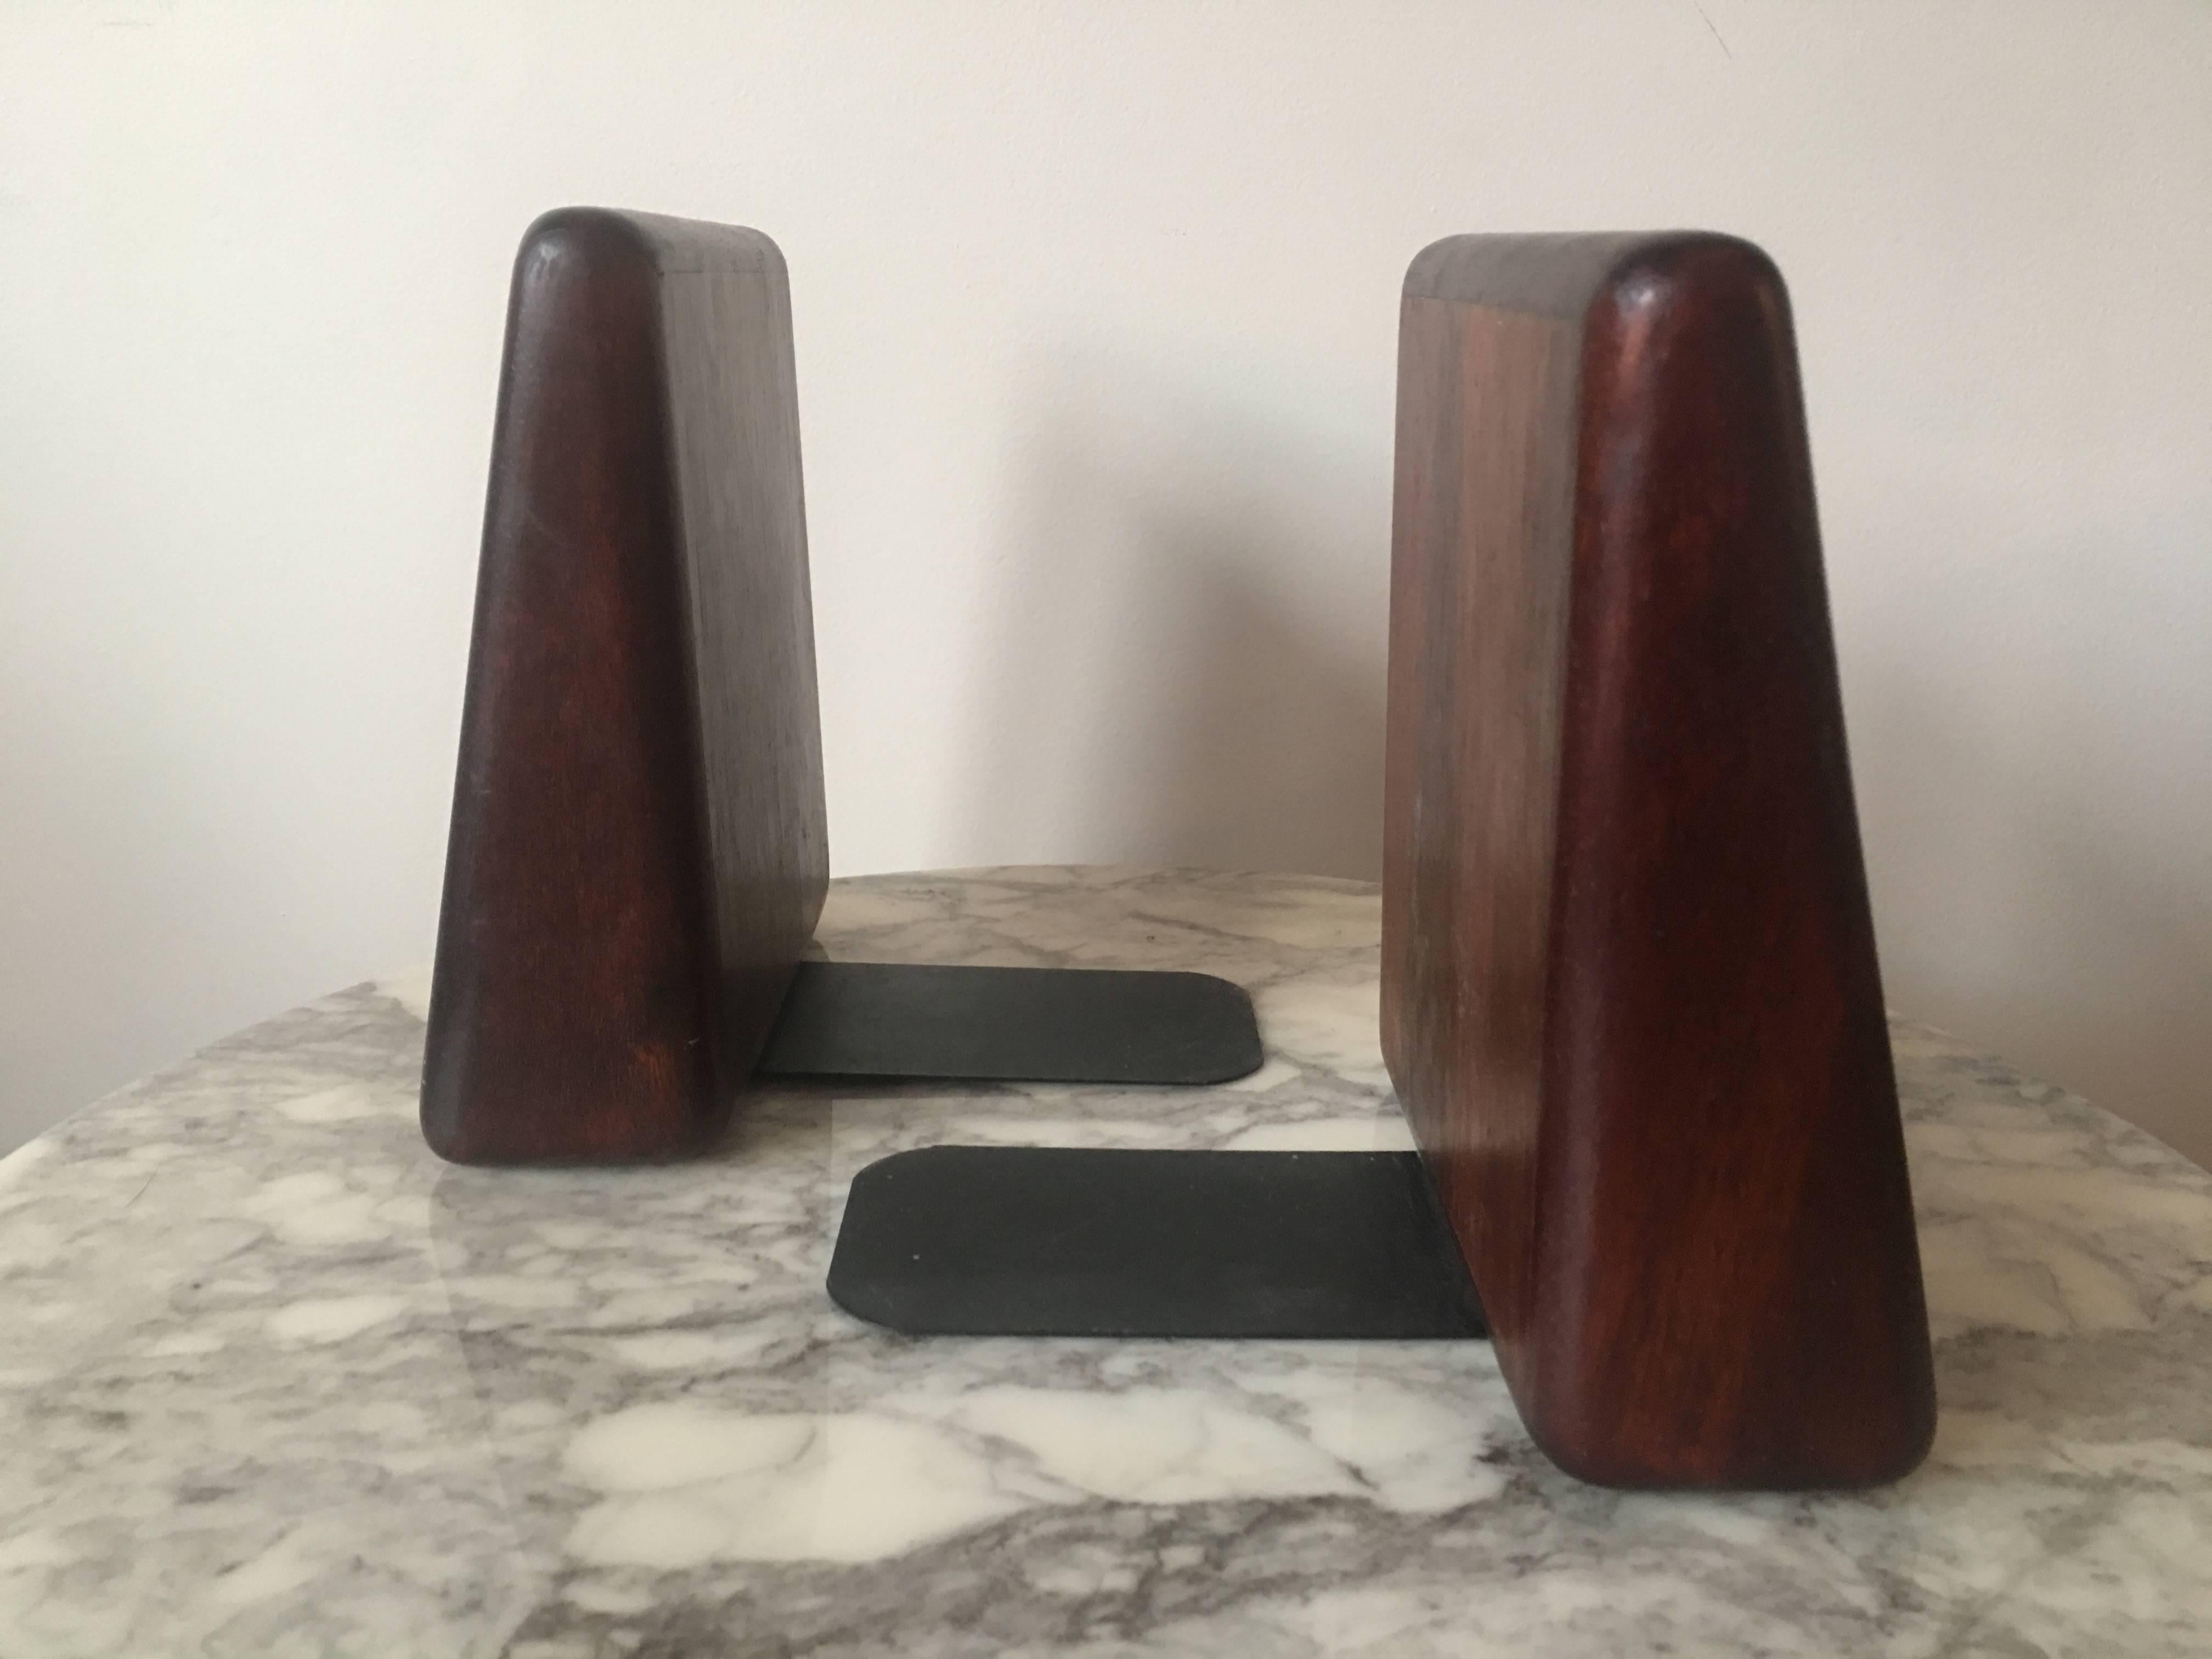 Rosewood bookends. In excellent original condition with lovely grain pattern and color.